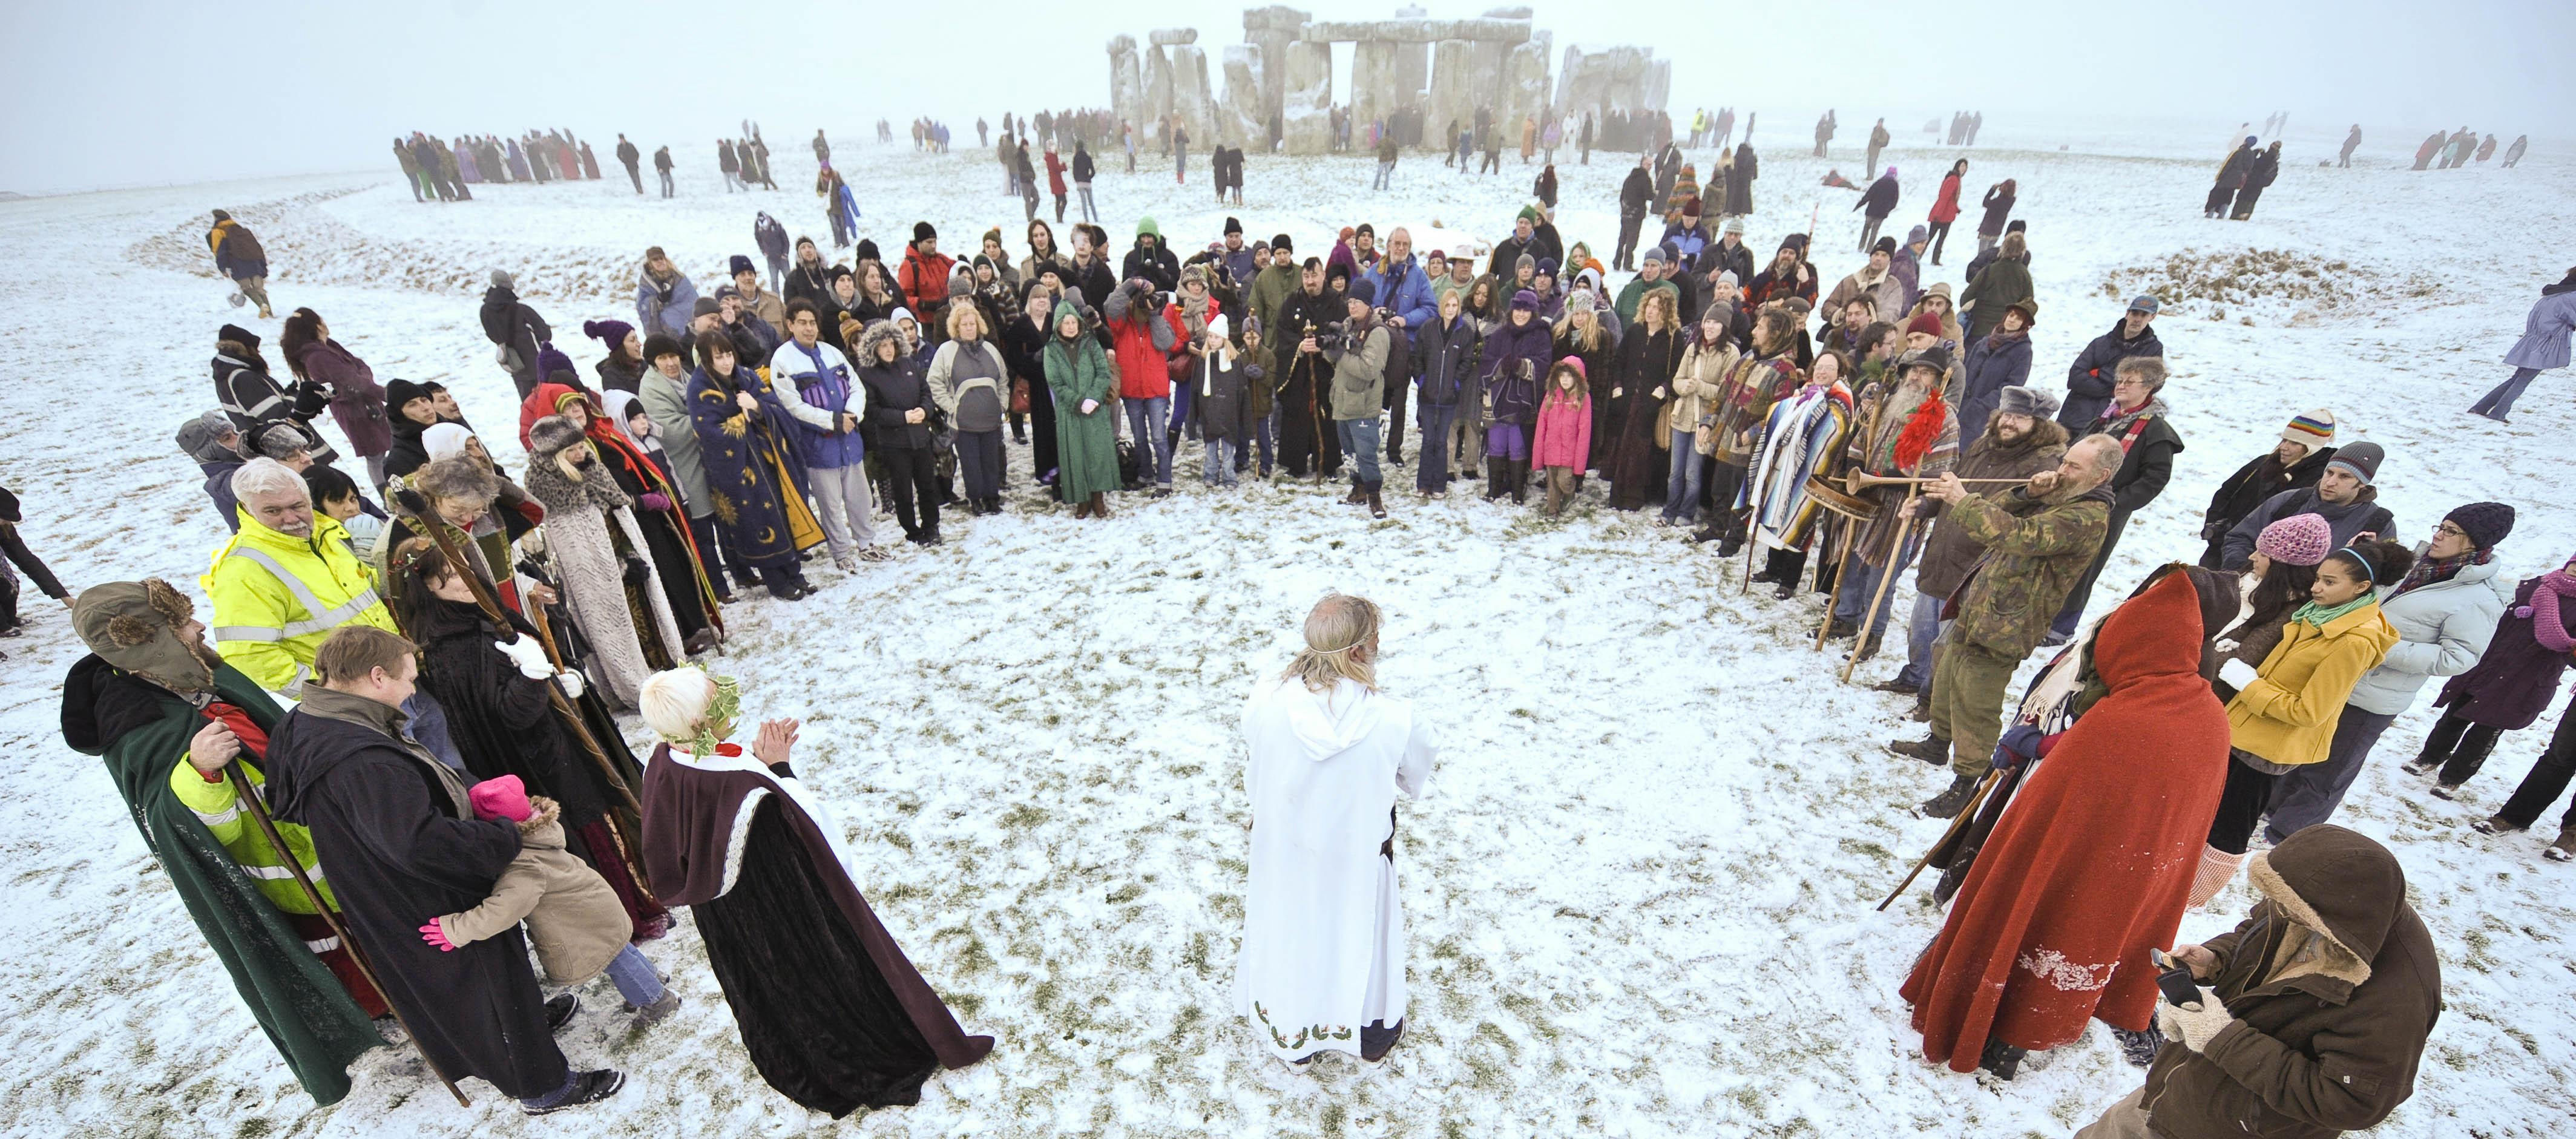 Crowds gather to celebrate the Winter Solstice in 2009